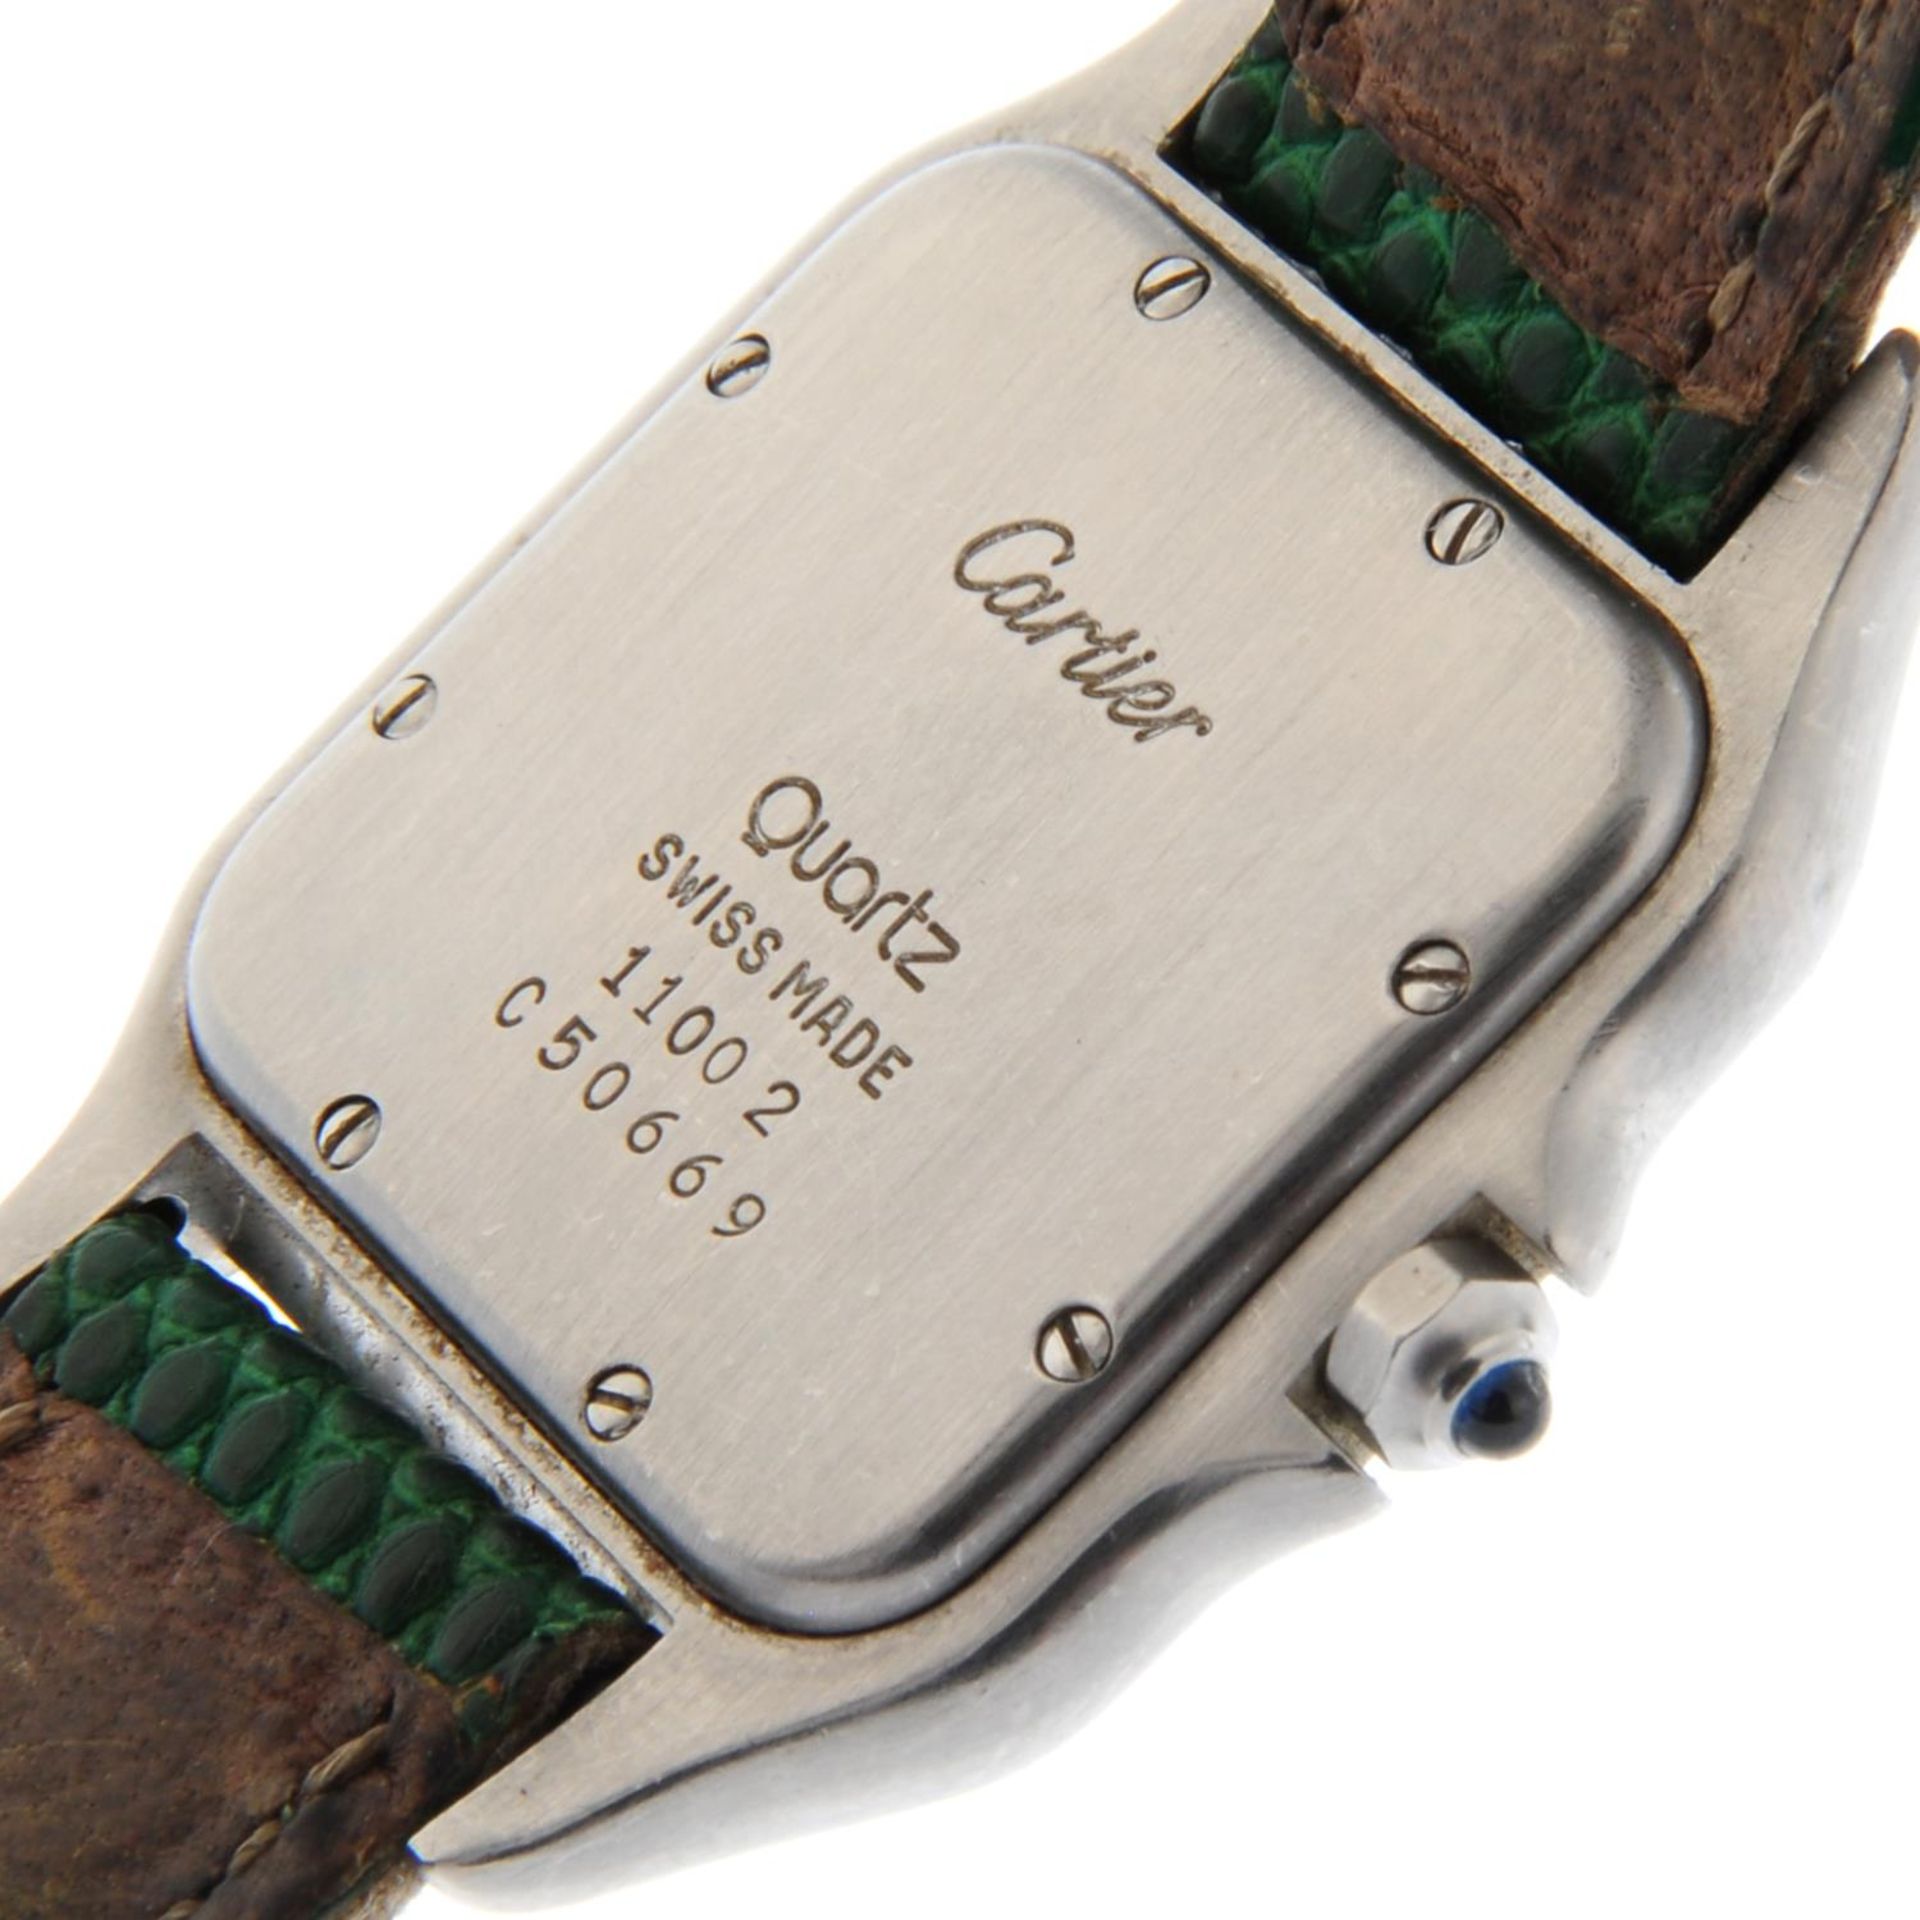 CARTIER - a Panthere wrist watch. - Image 5 of 5